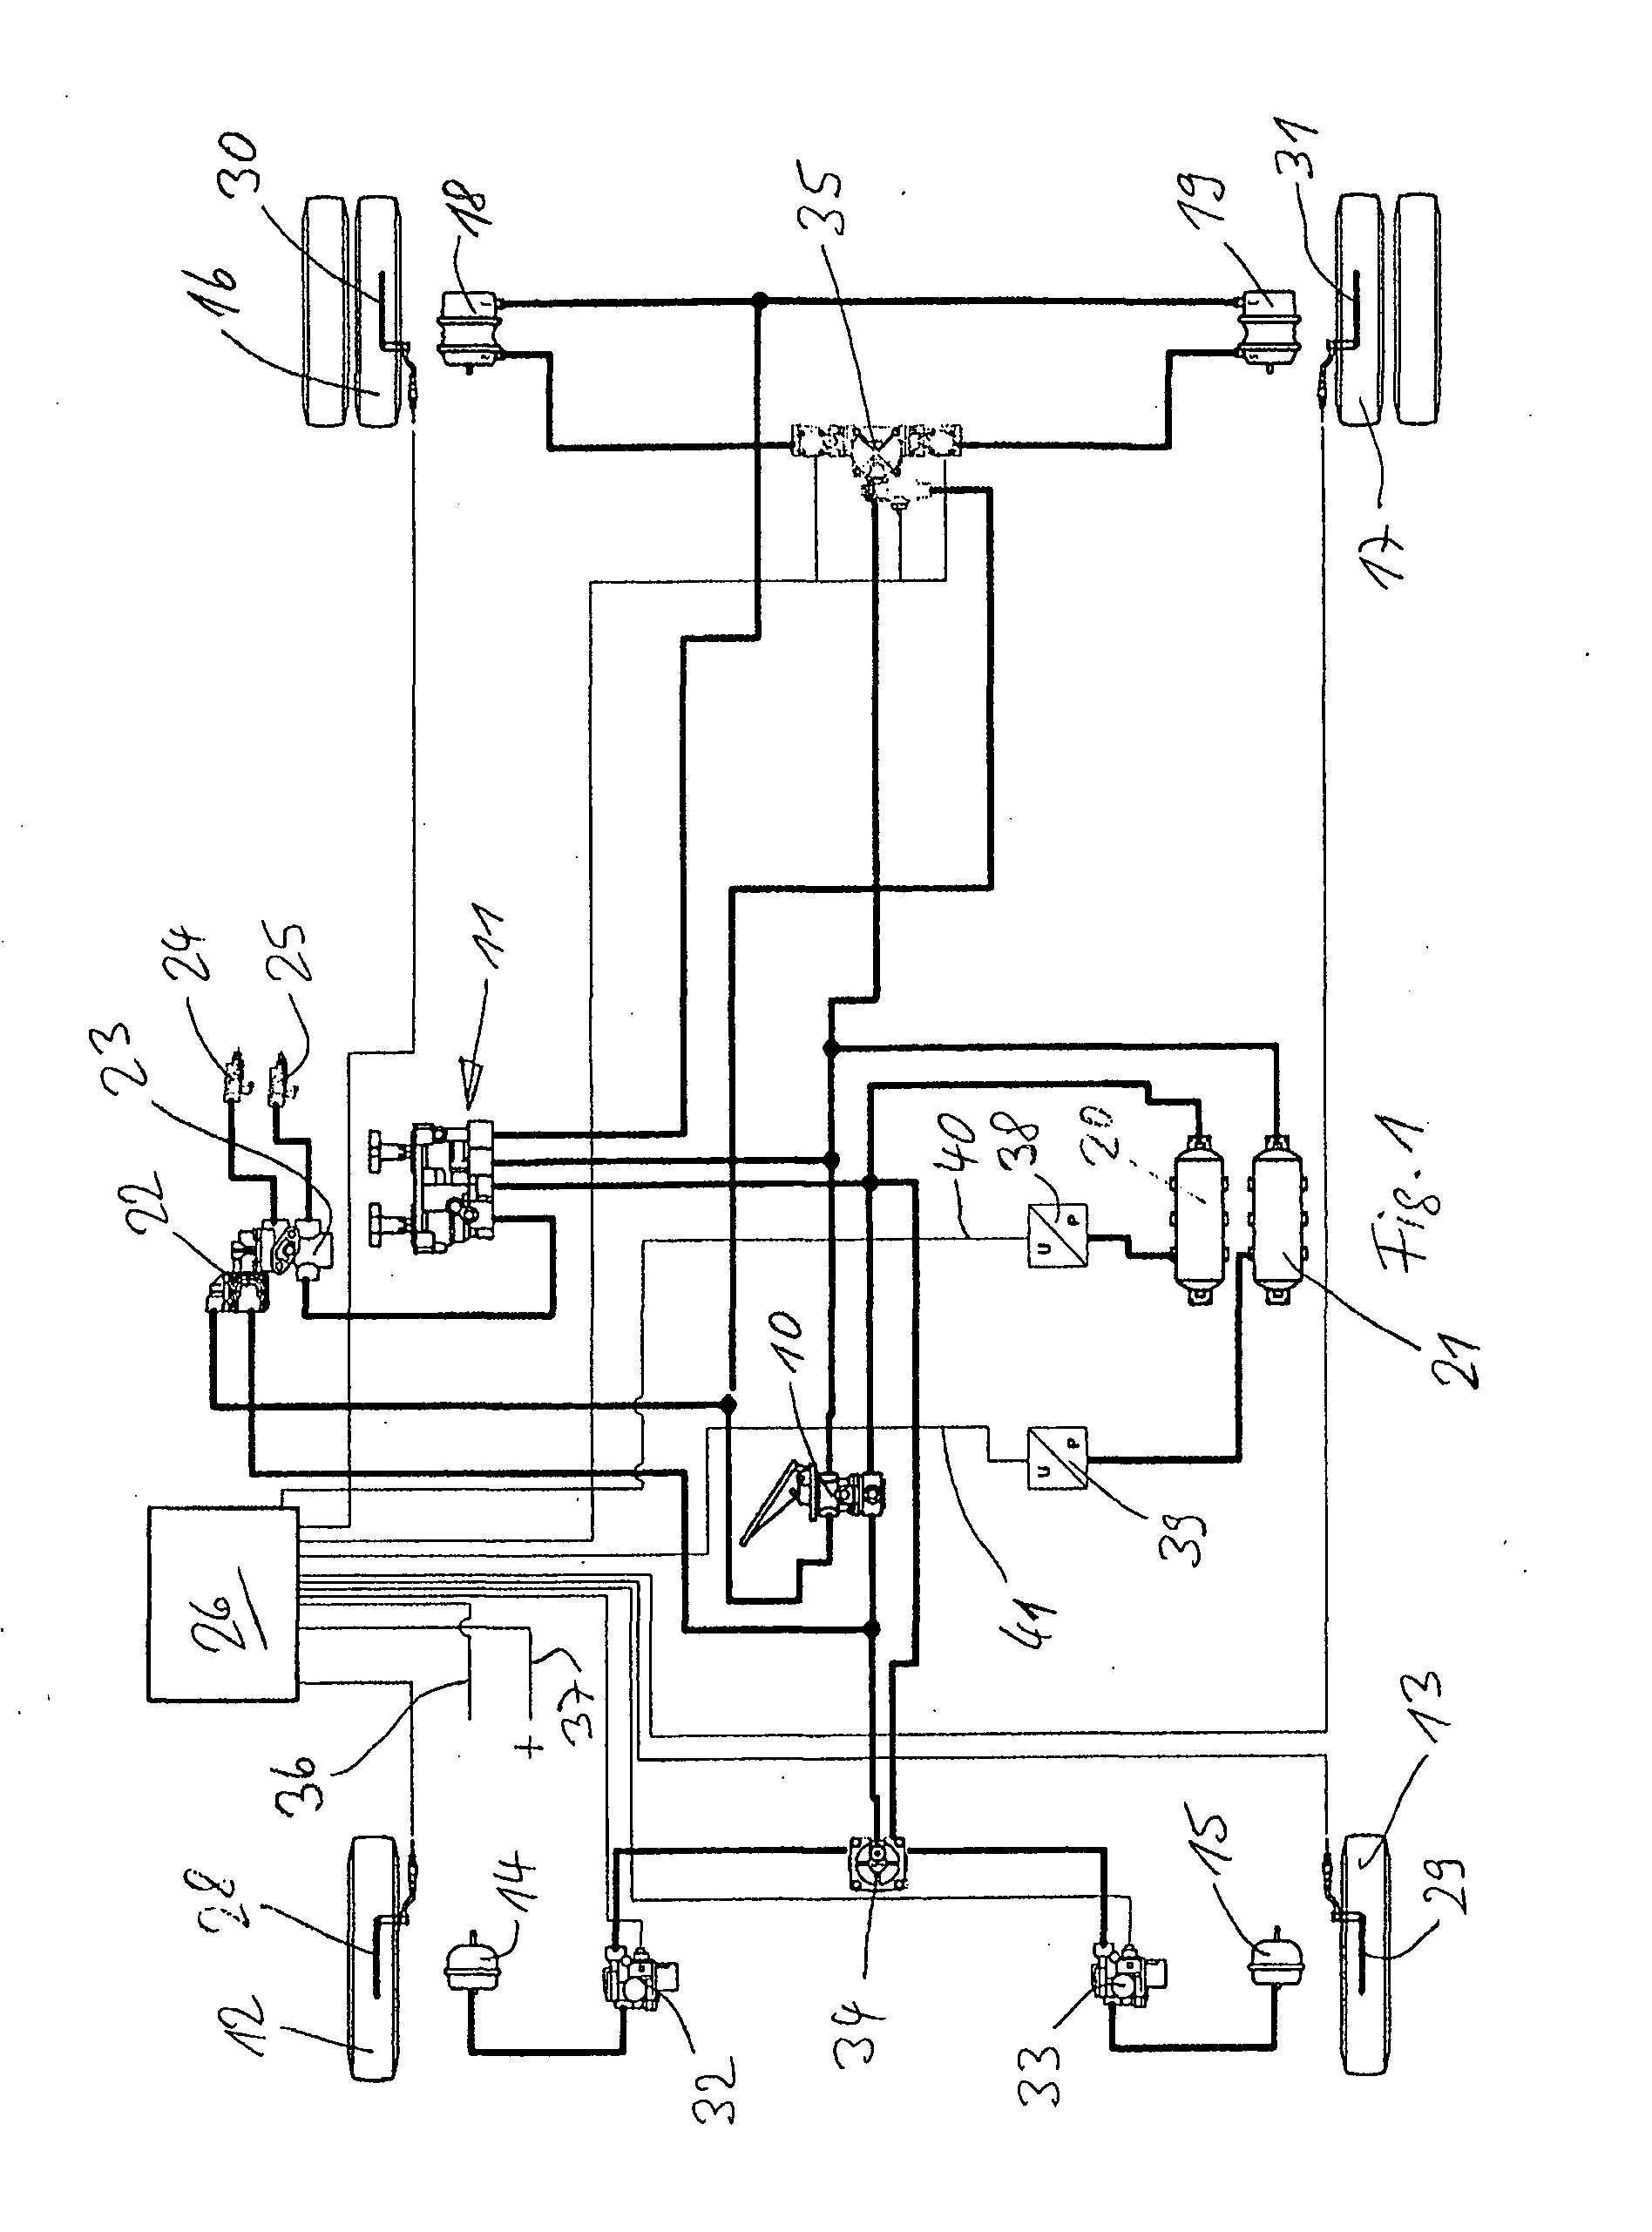 Method and Device for Operating Compressed-Air Brakes